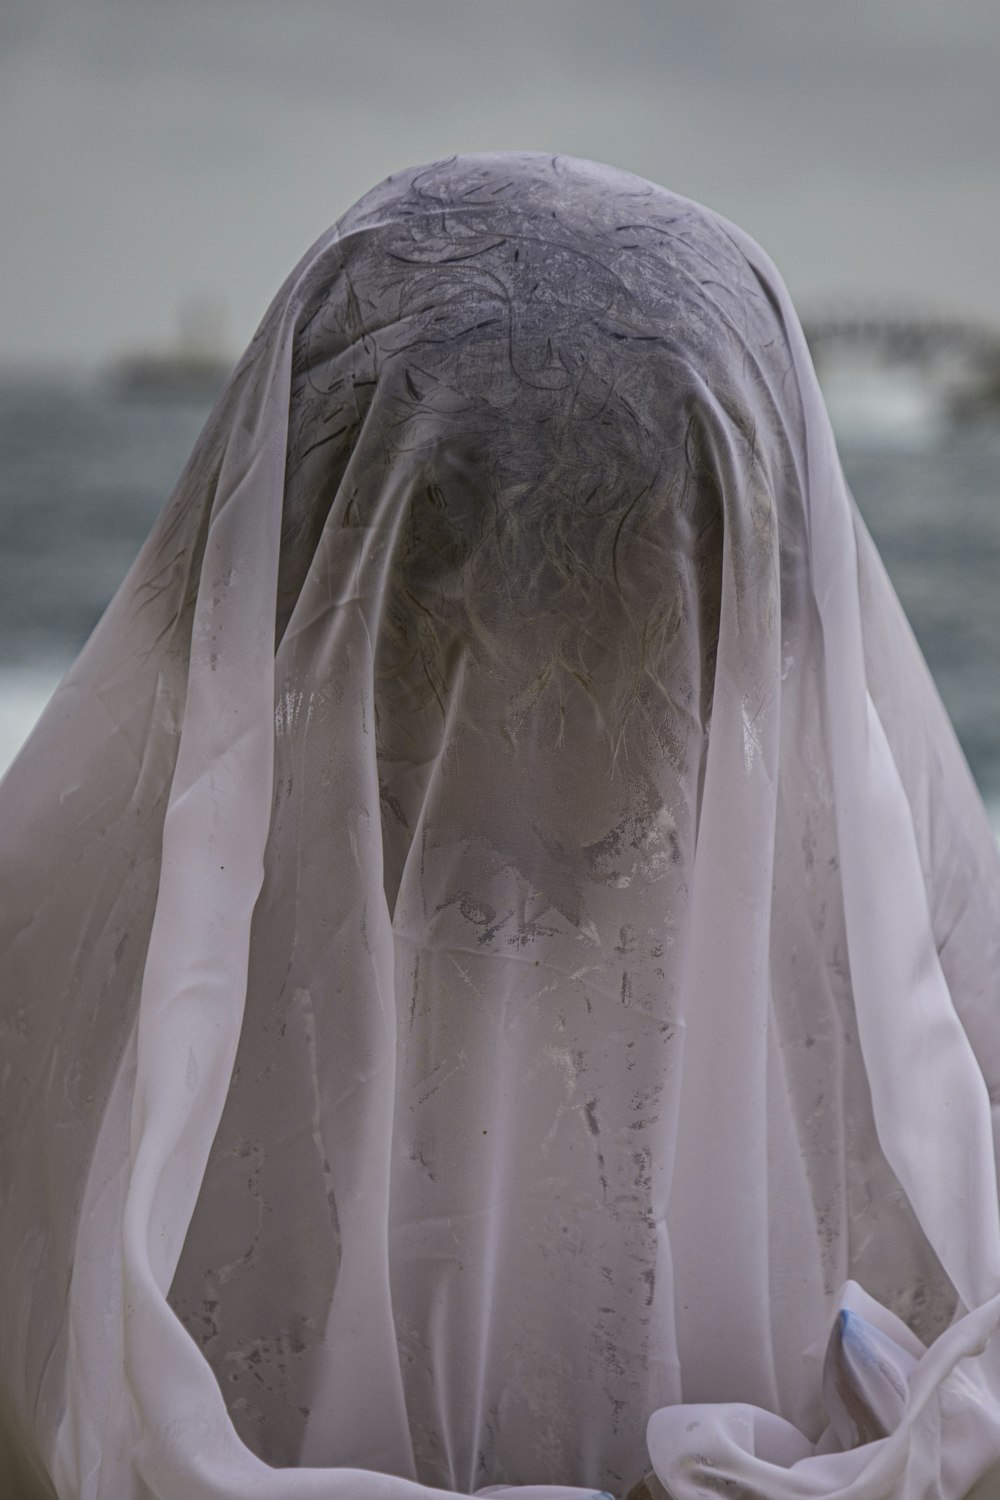 a woman covered in a white veil standing in front of a body of water